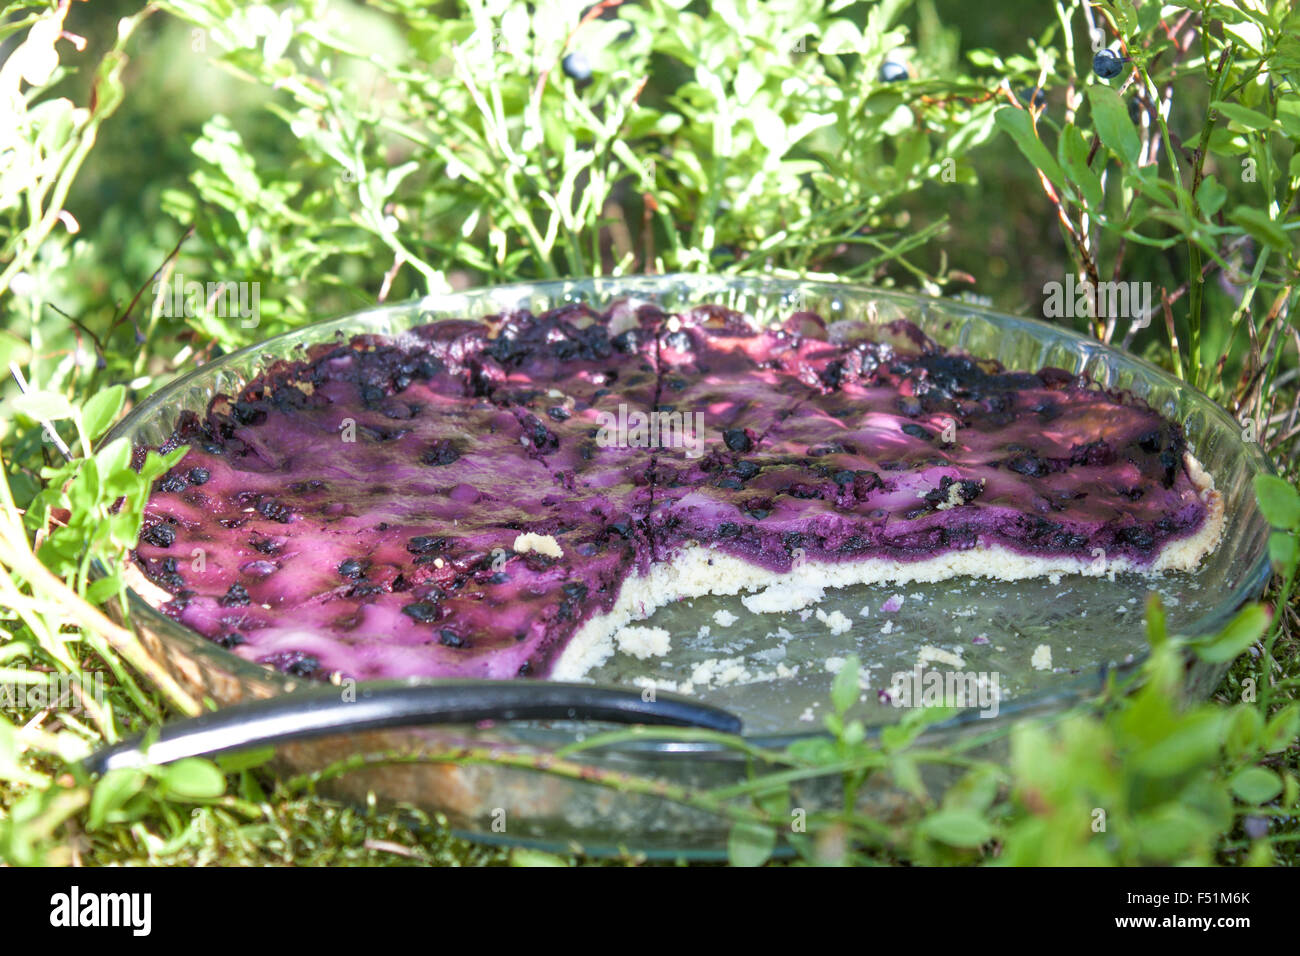 Whole lilac bilberry, vaccinium myrtillus pie, in the blueberry forrest Stock Photo